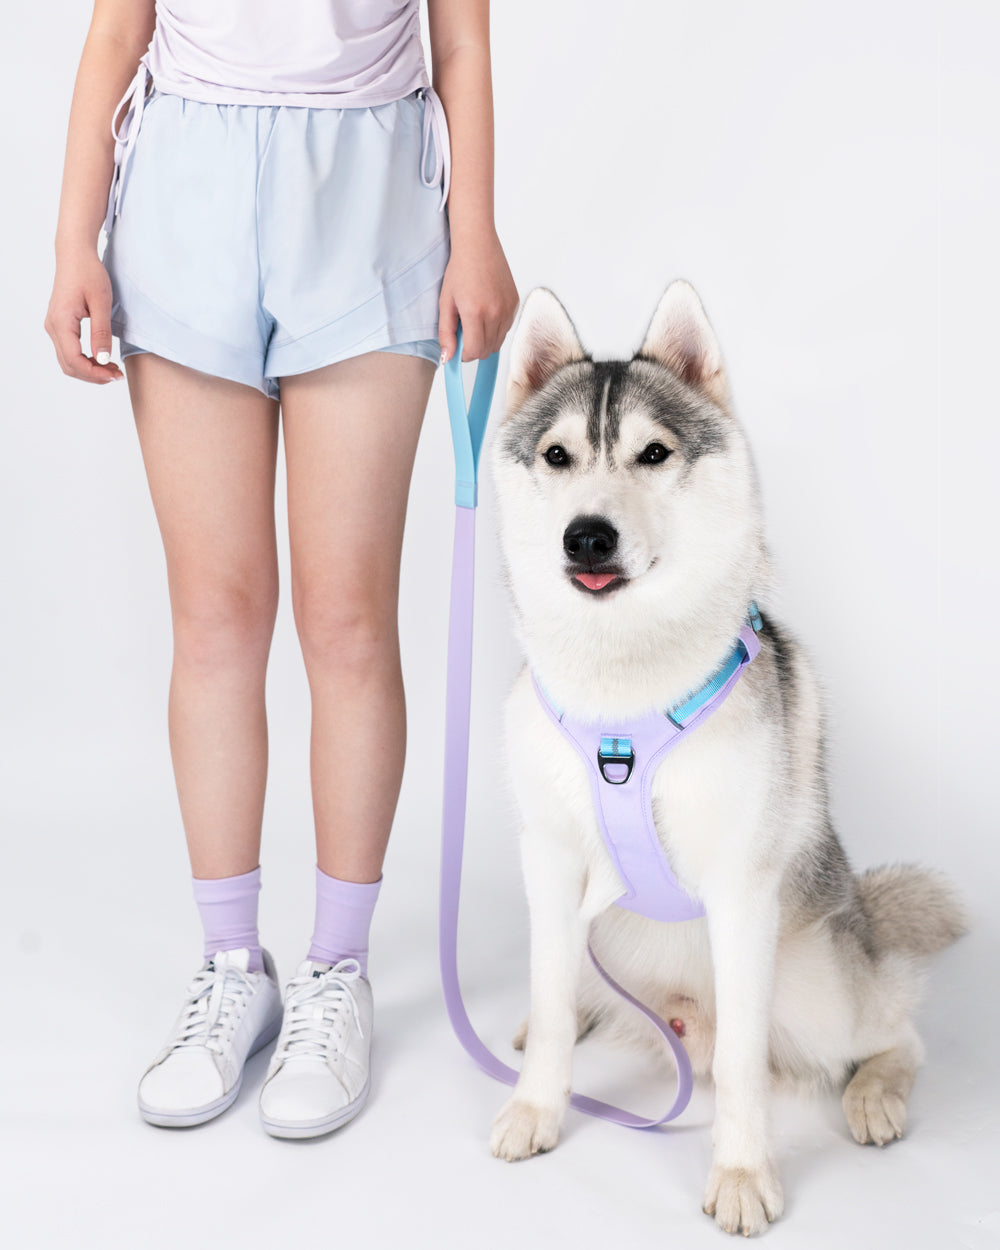 A stylish dog harness in lavender blue, suitable for daily walking and outdoor activities,  which matches the waterproof dog leash